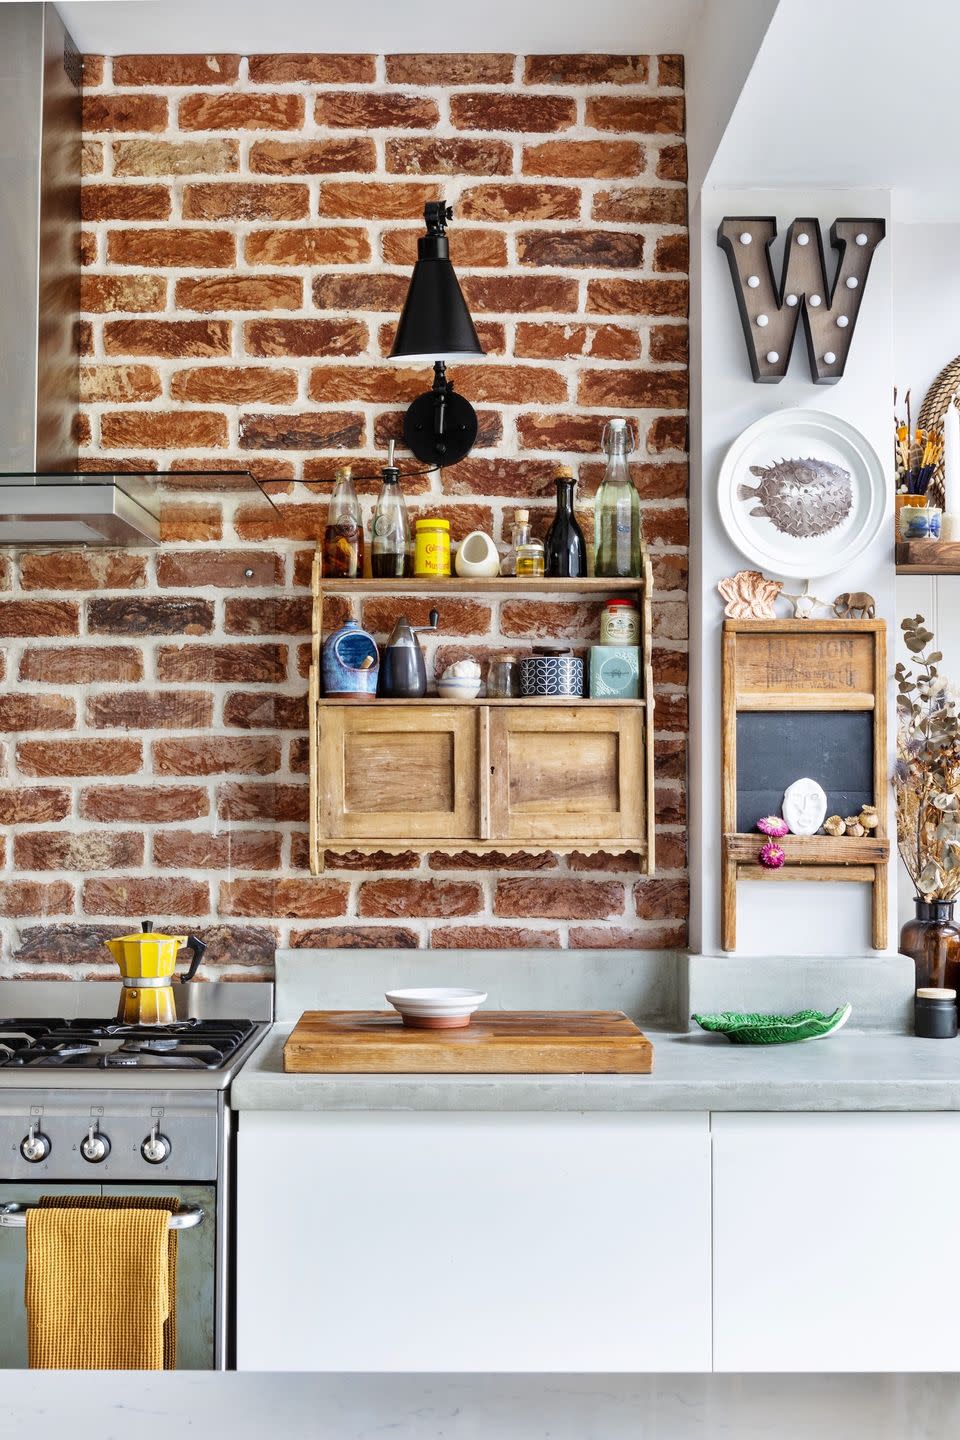 exposed brick wall and washboard in kitchen